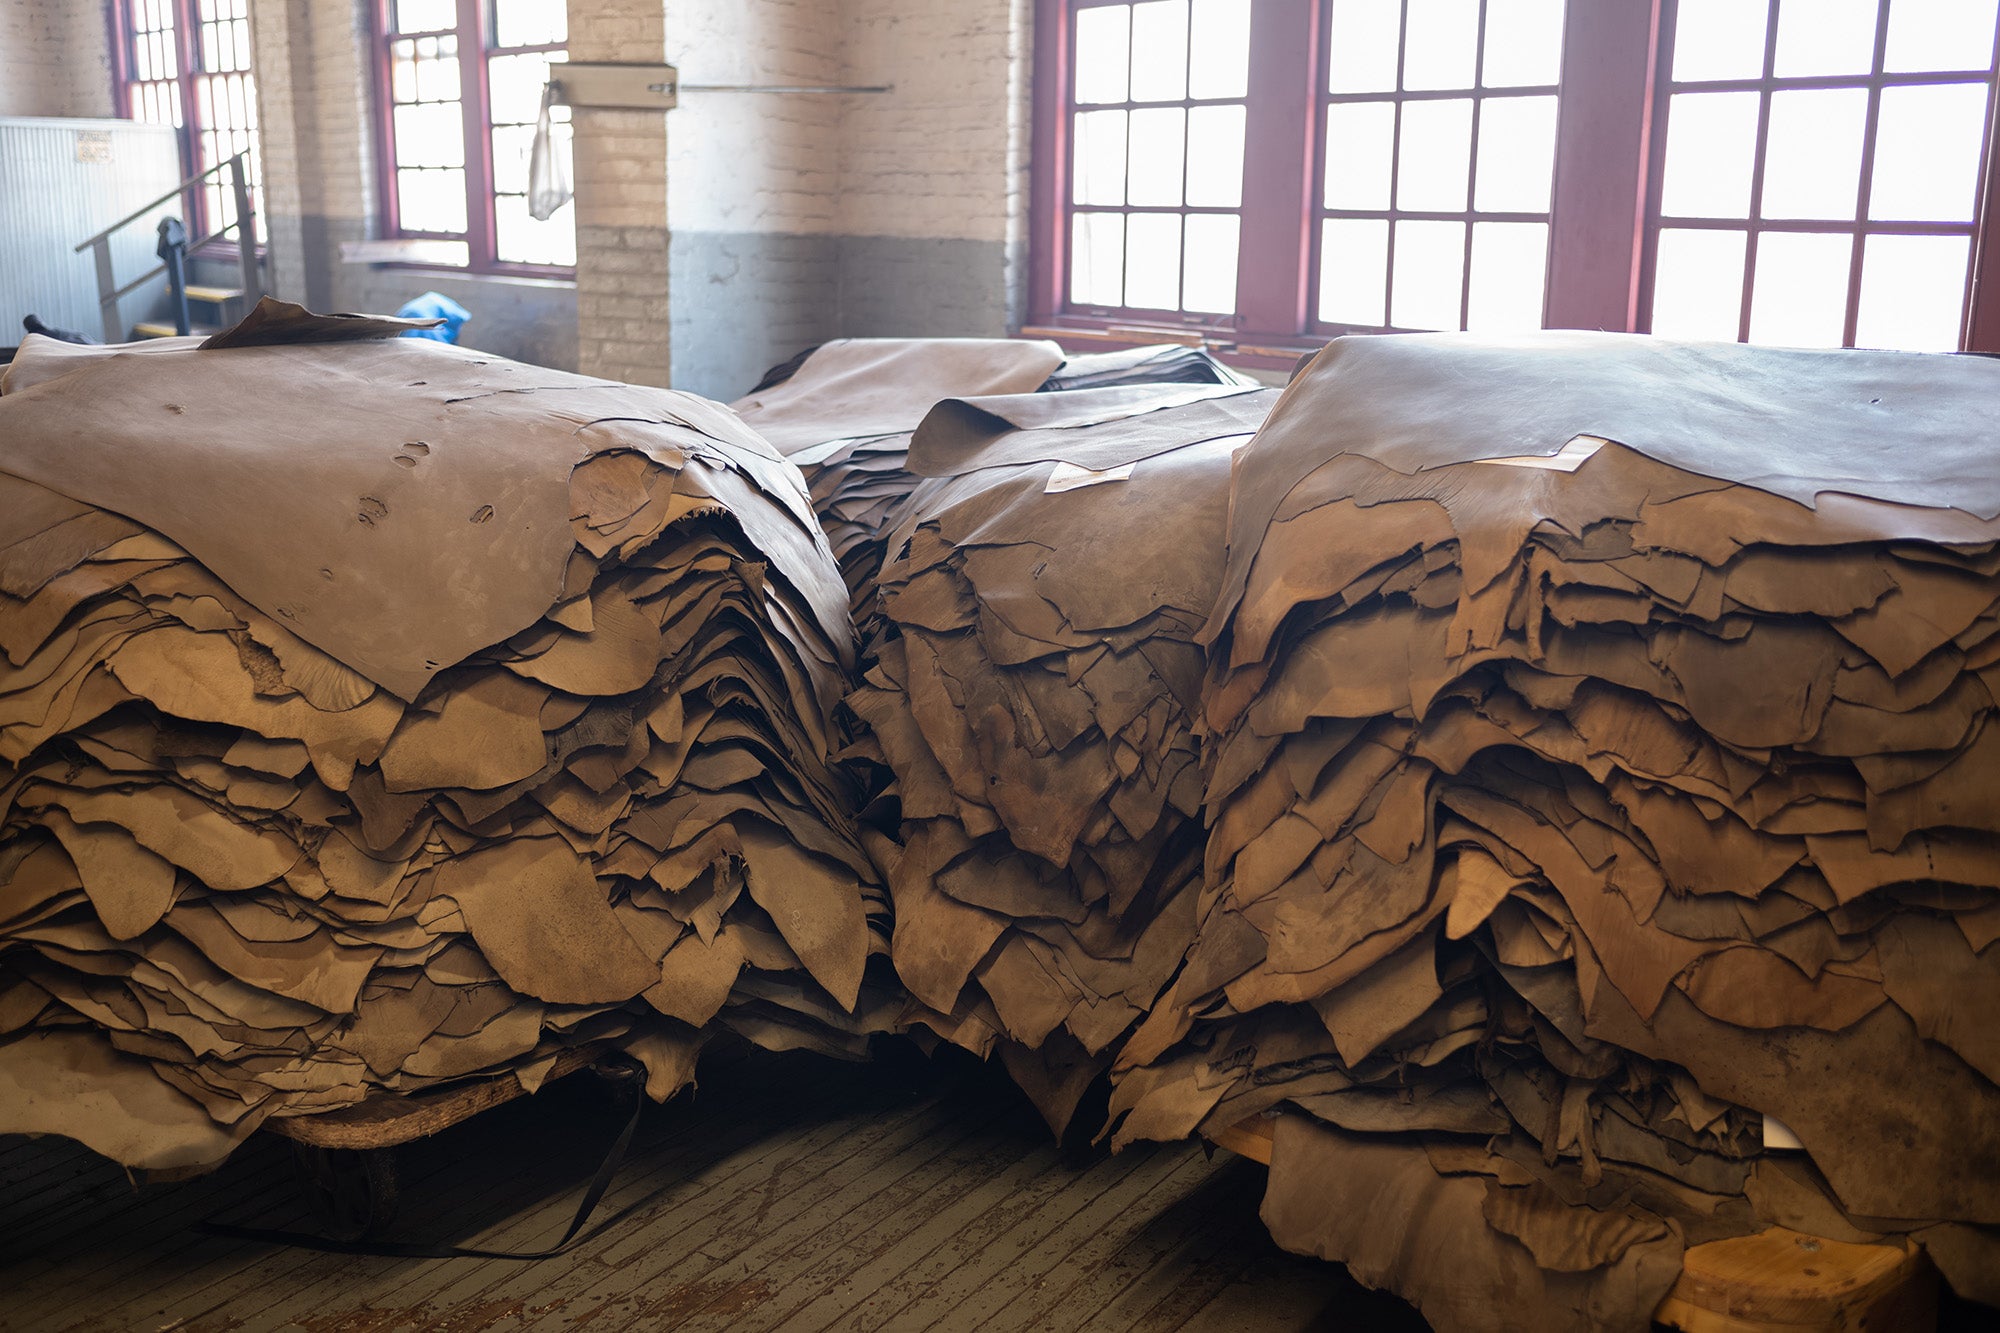 Piles of untanned horsehide at Horween Leather tannery.